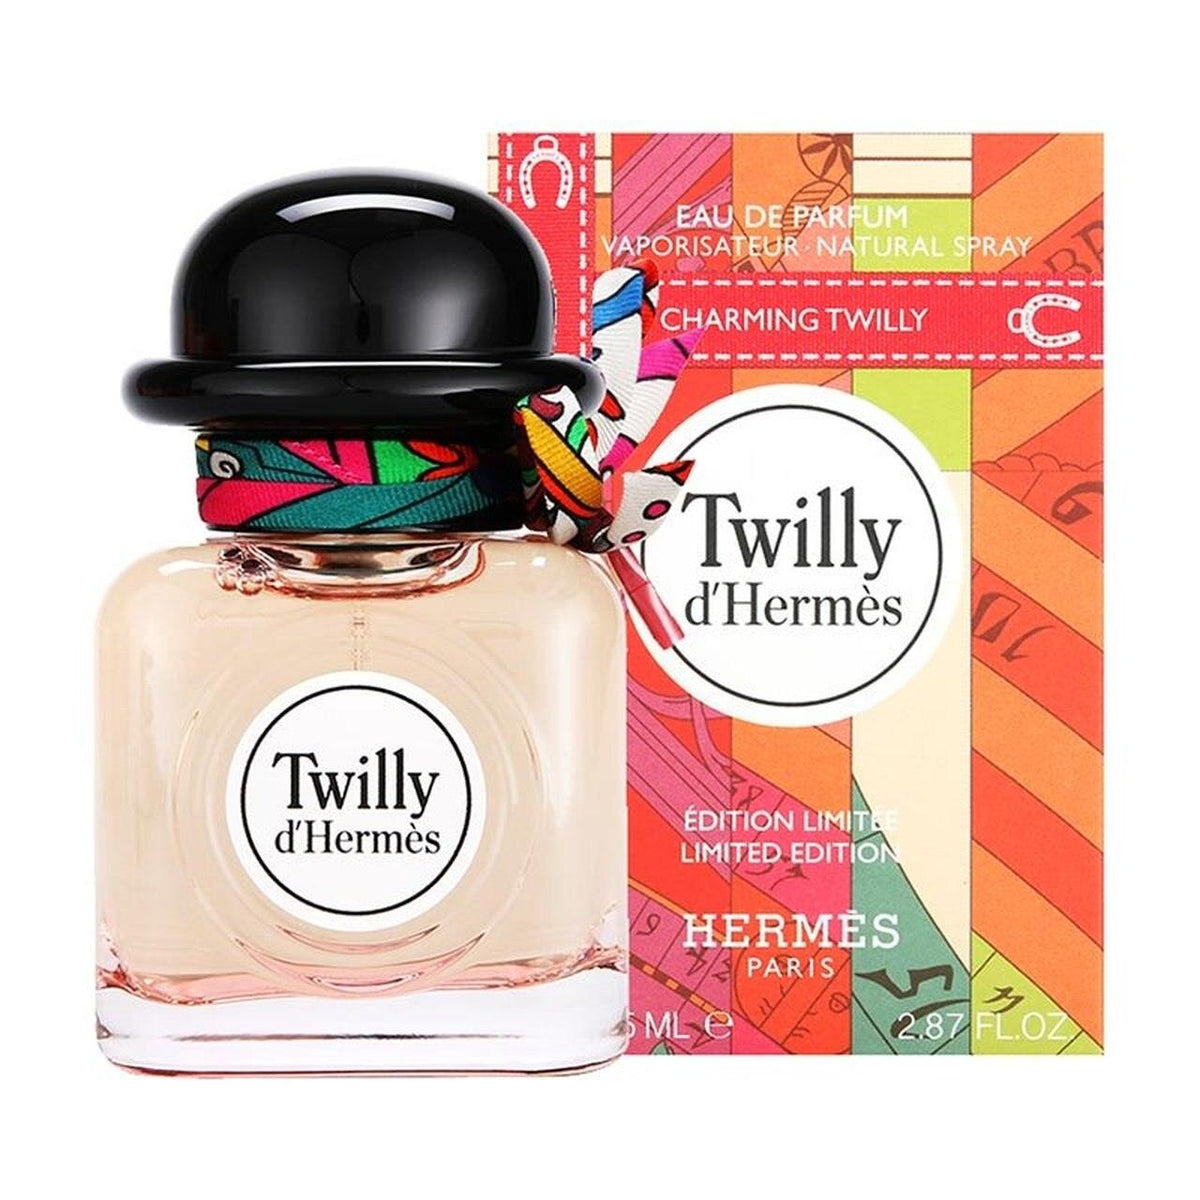 Hermes Twilly D'Hermès Charming Twilly Limited Edition EDP - Perfume Oasis